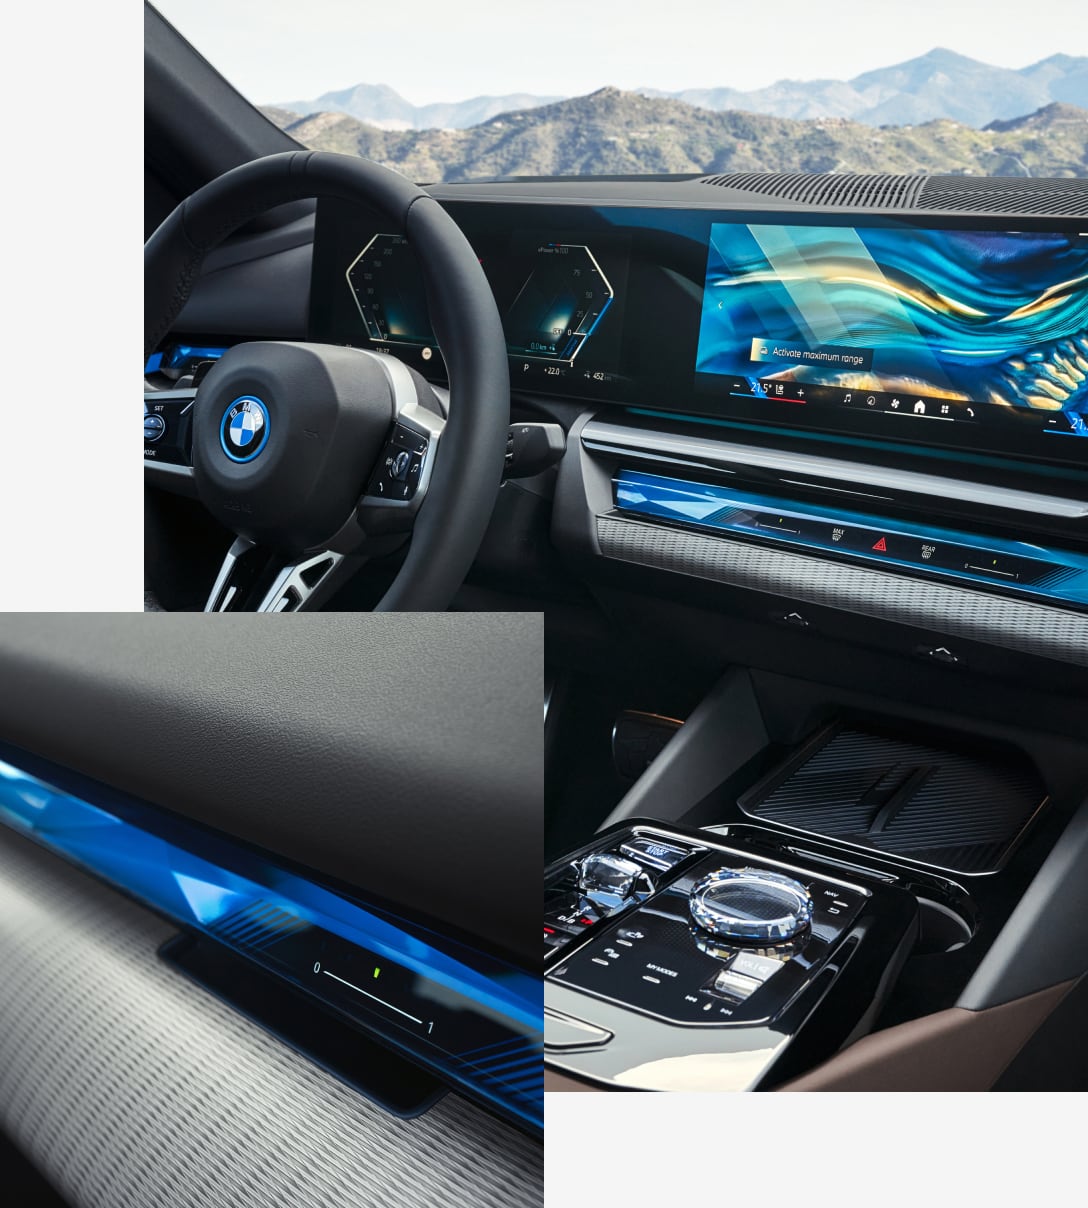 Interior view of the BMMW i5 Integration Bar dashboard and advanced BMW Curved Display 